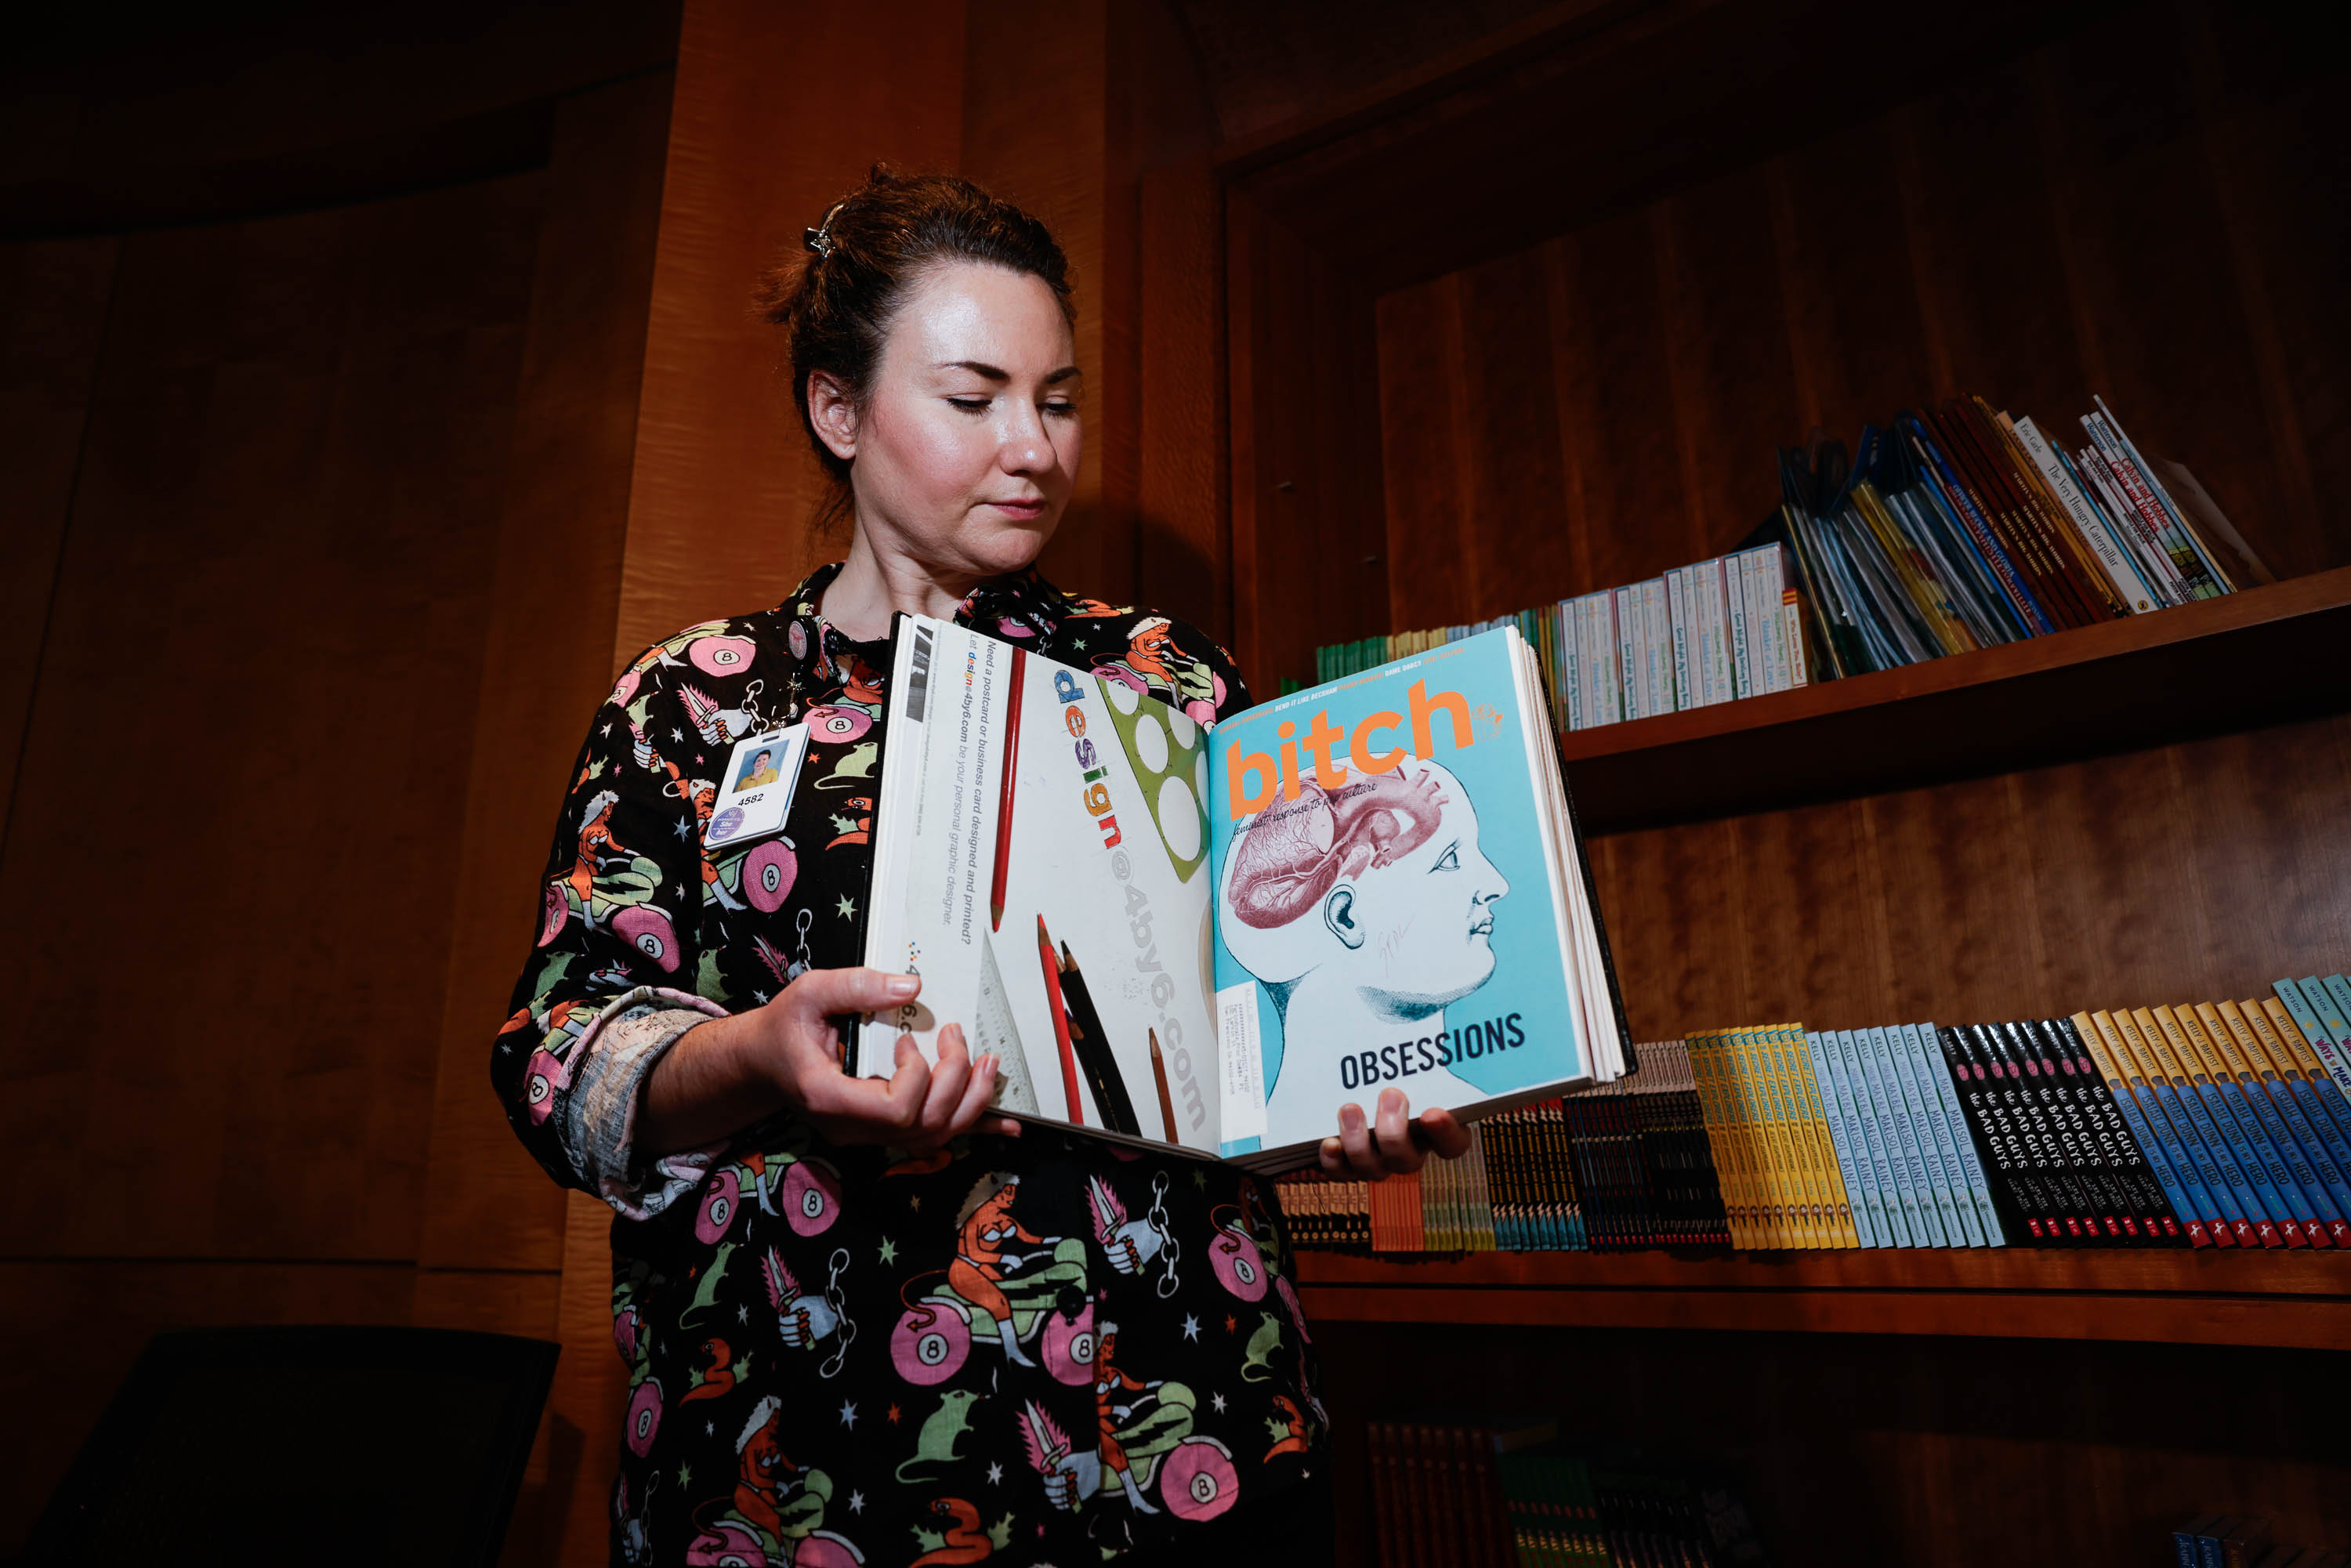 A woman holds up a Bitch magazine with a shelf of colorful books behind her.